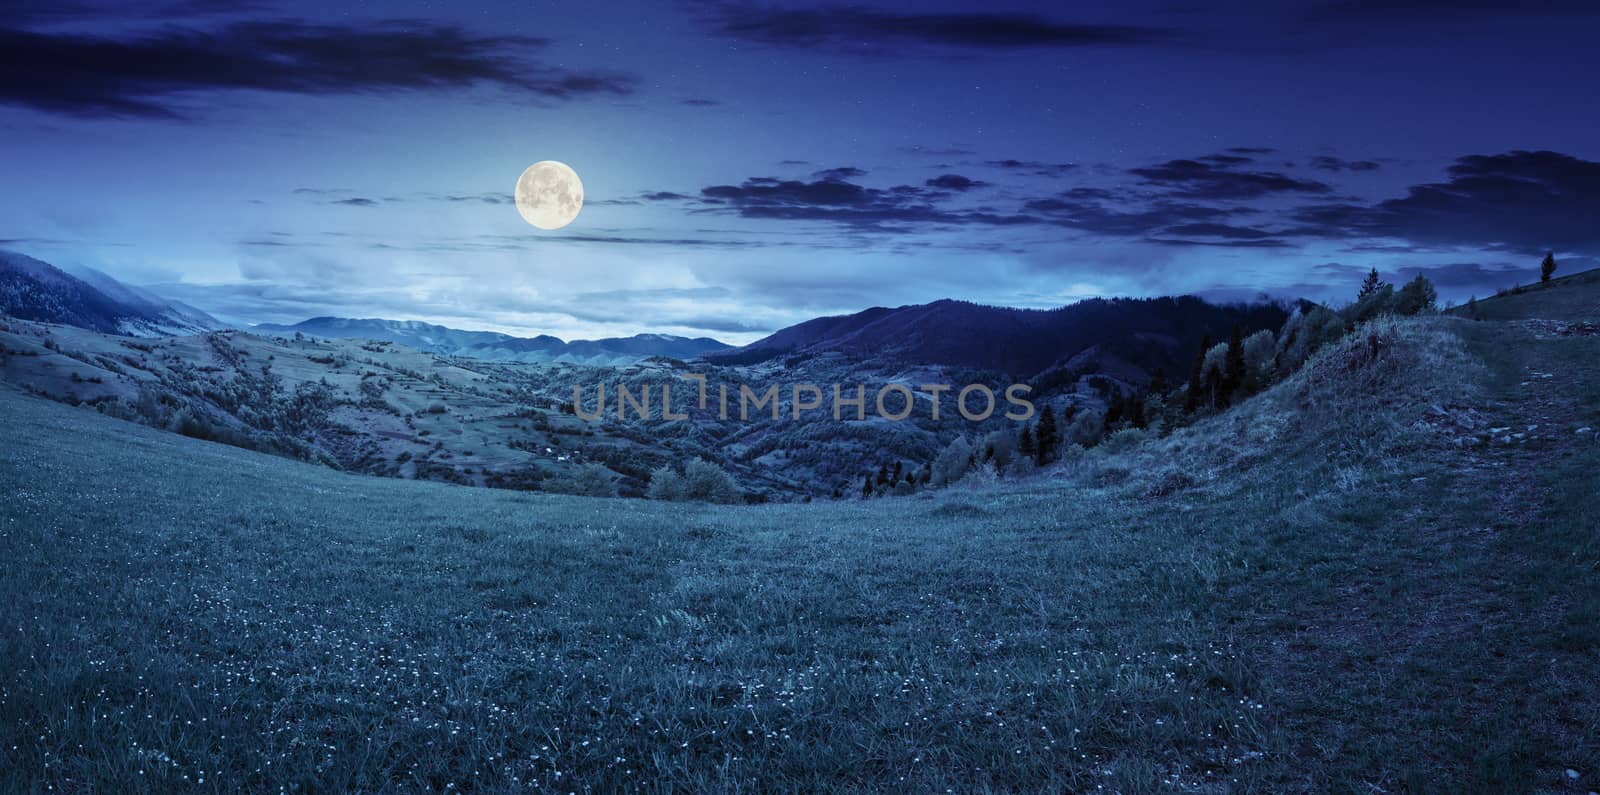 village in mountains behind the agricultural meadow with flowers on  hillside at night in full moon light